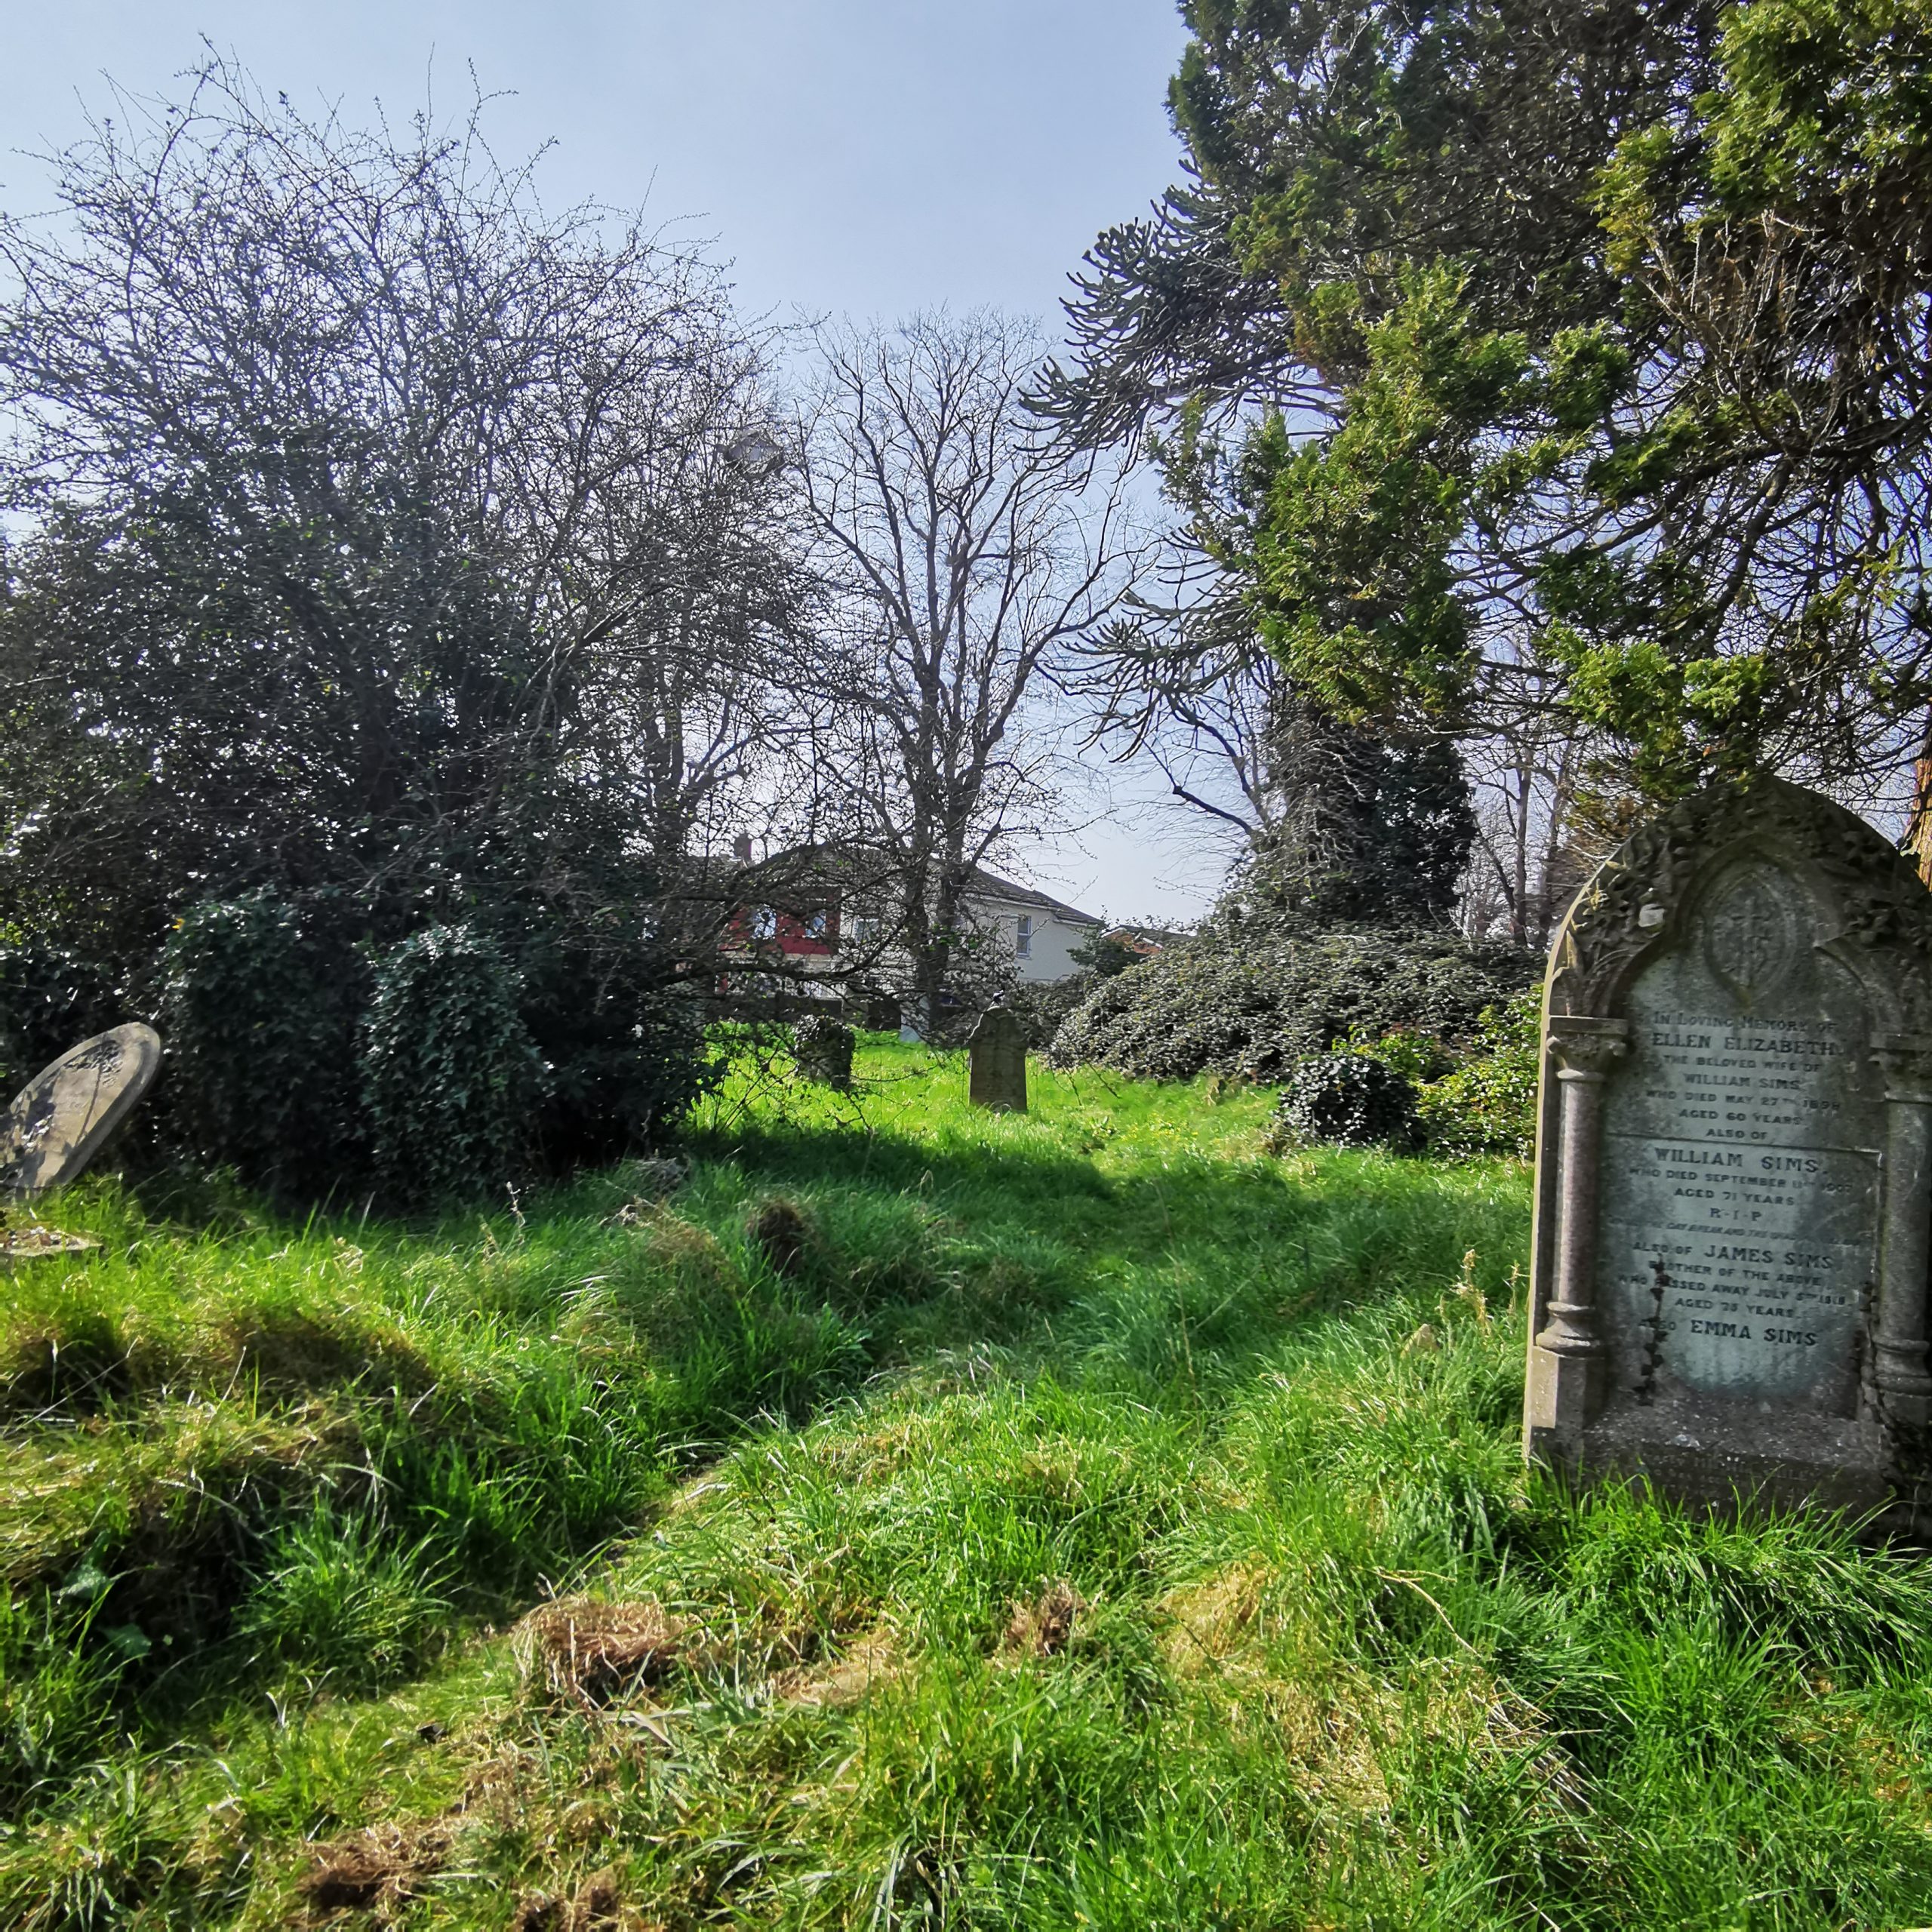 There is a grassed path with grassed areas to left and right. To the left in the midground is a large bush. To the right is an ornate headstone featuring columns and ornate decoration with a crest top centre